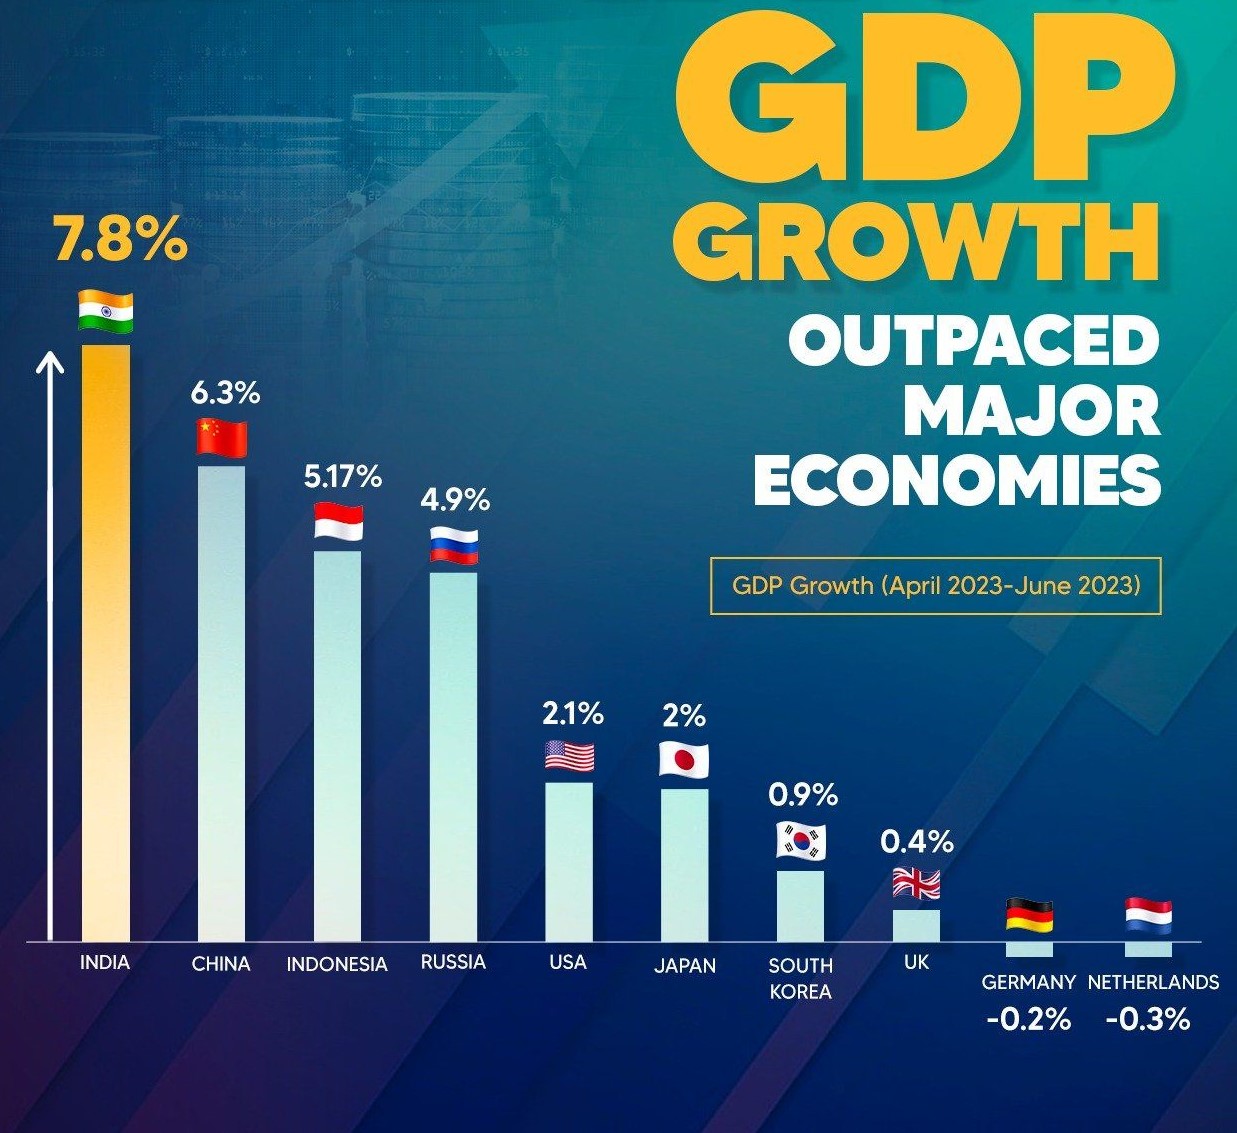 At 7.8%, India leads the pack of growing economies as Europe lags behind 